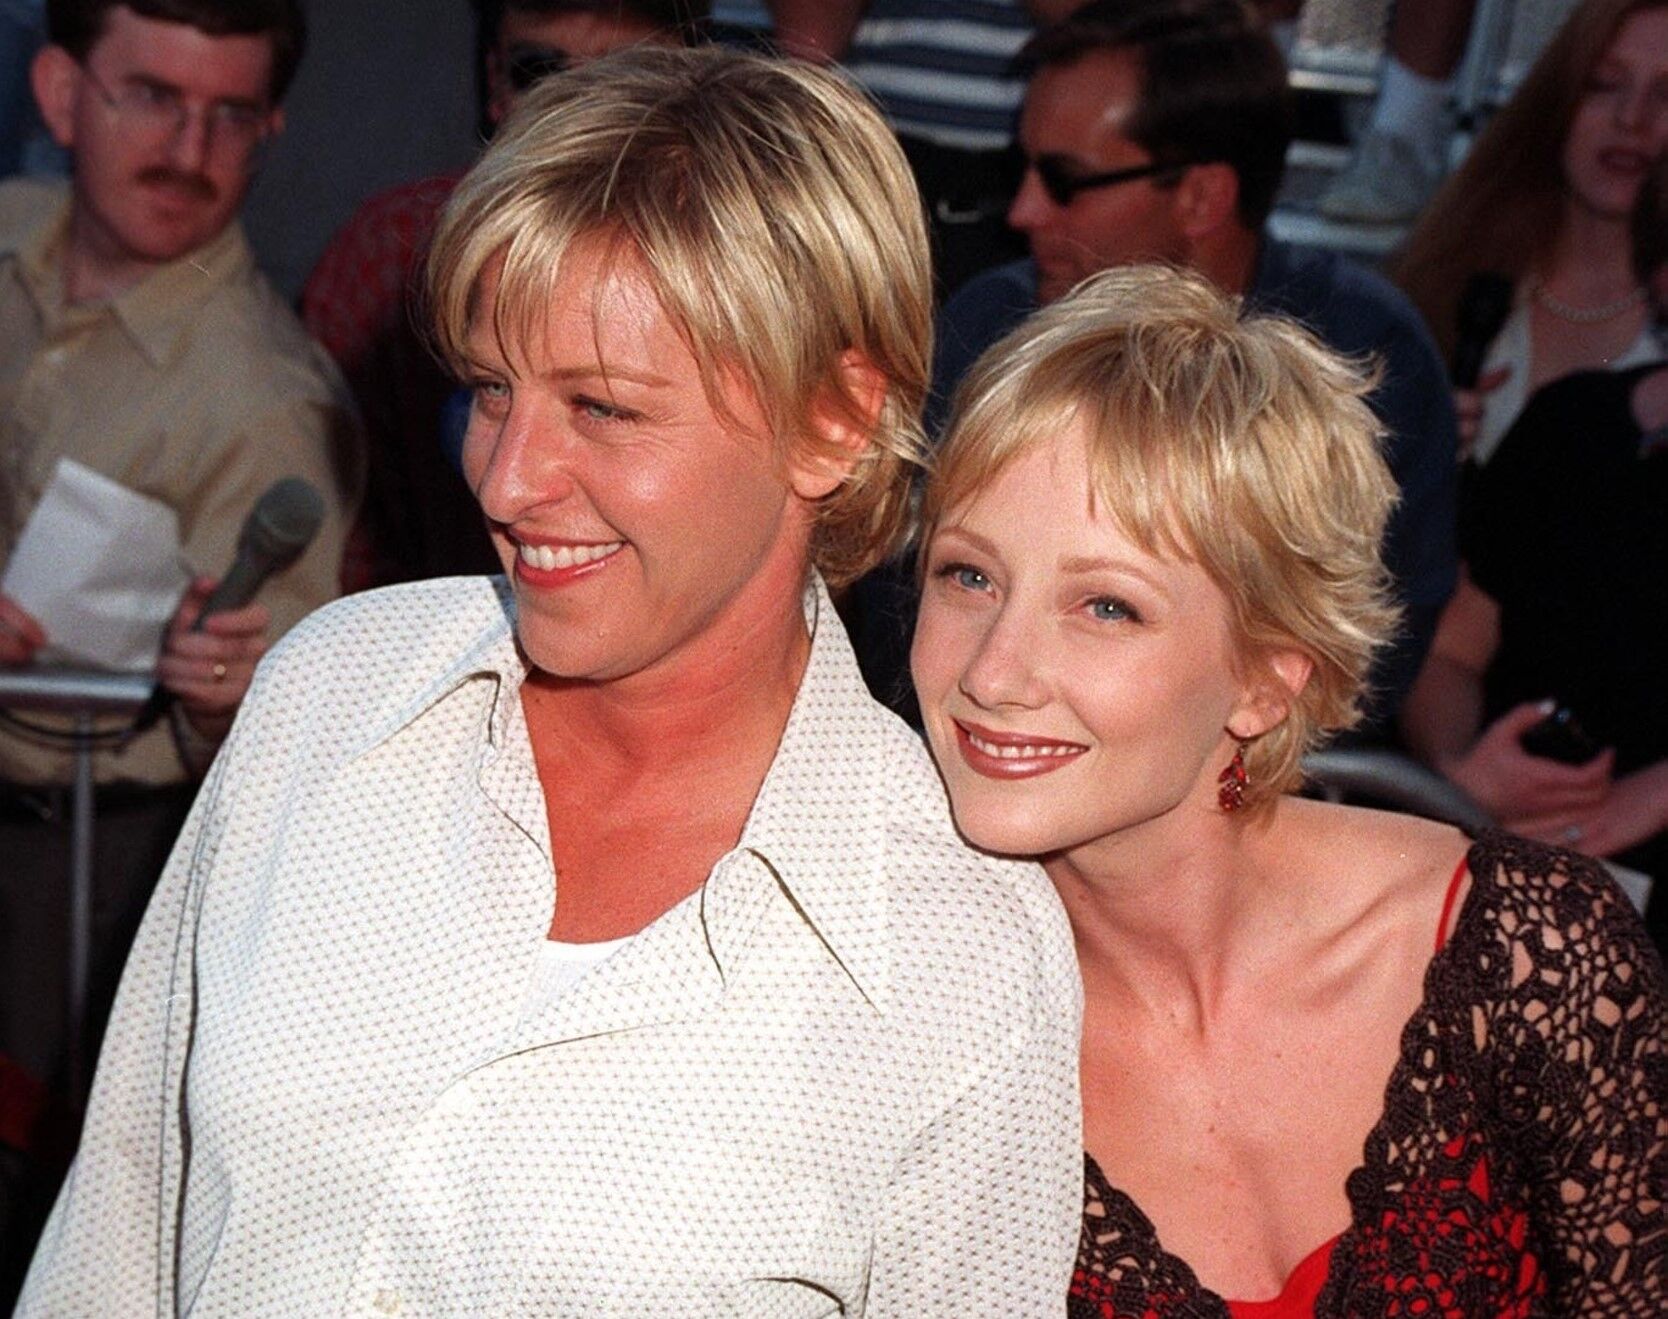 Ellen DeGeneres and Anne Heche at the 1999 premier of "Contact."